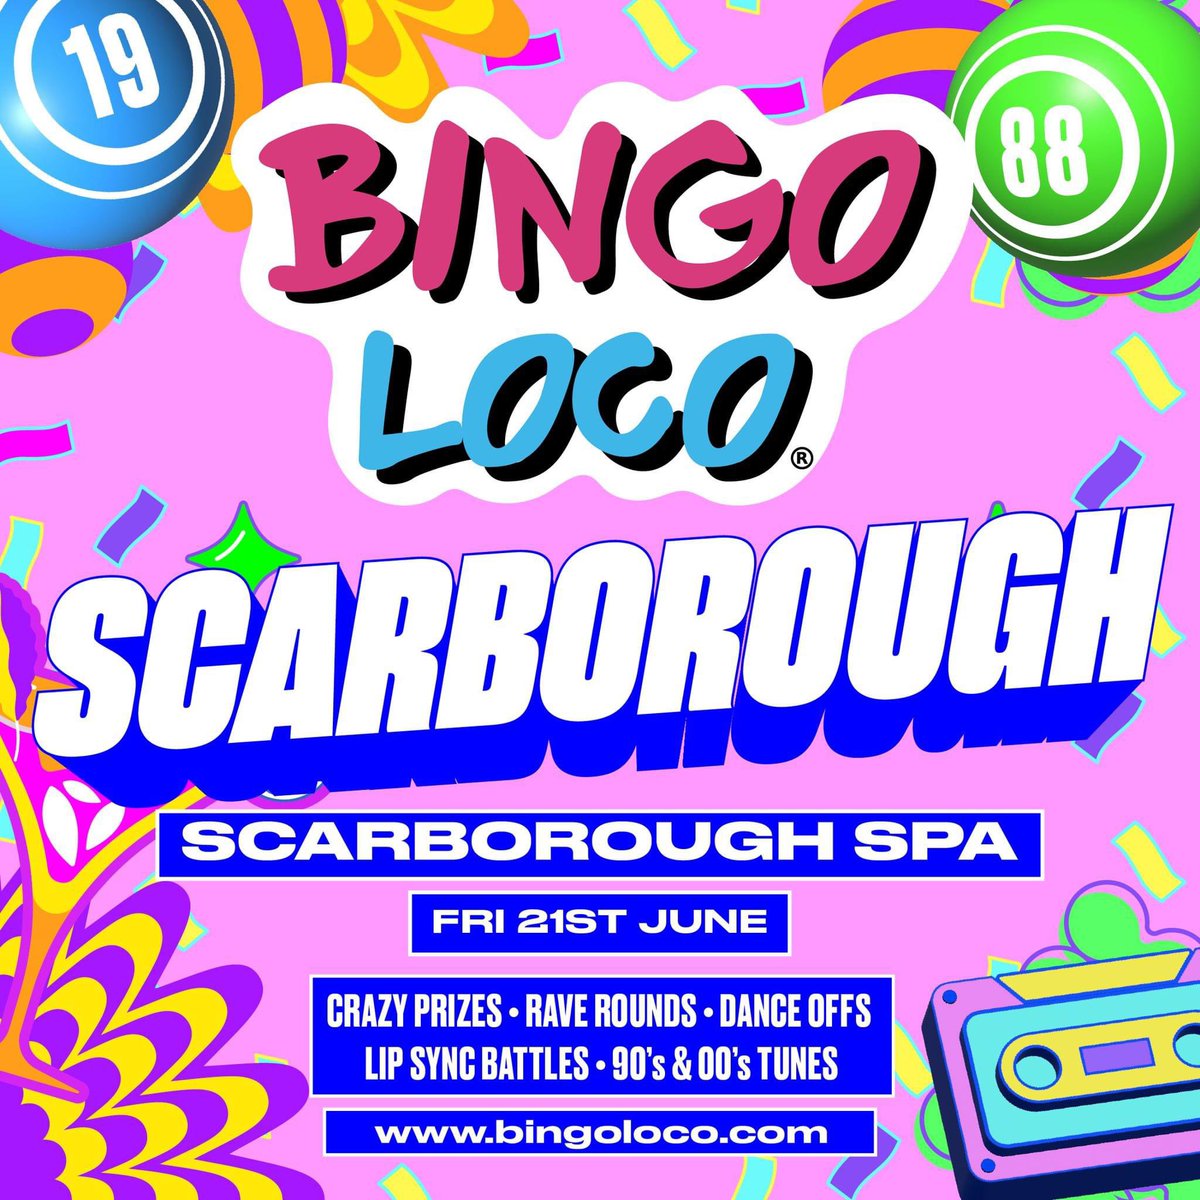 ⚡ 𝘼𝙏𝙏𝙀𝙉𝙏𝙄𝙊𝙉 𝙎𝘾𝘼𝙍𝘽𝙊𝙍𝙊𝙐𝙂𝙃 ⚡ The ultimate bingo rave brought to you by Bingo Loco returns! 💃🕺 Get your groove on with a wild party filled with dancing, confetti cannons, cold fire and of course…some bingo! 📆 Friday 21st June 🎫 tinyurl.com/2tdsyhh3